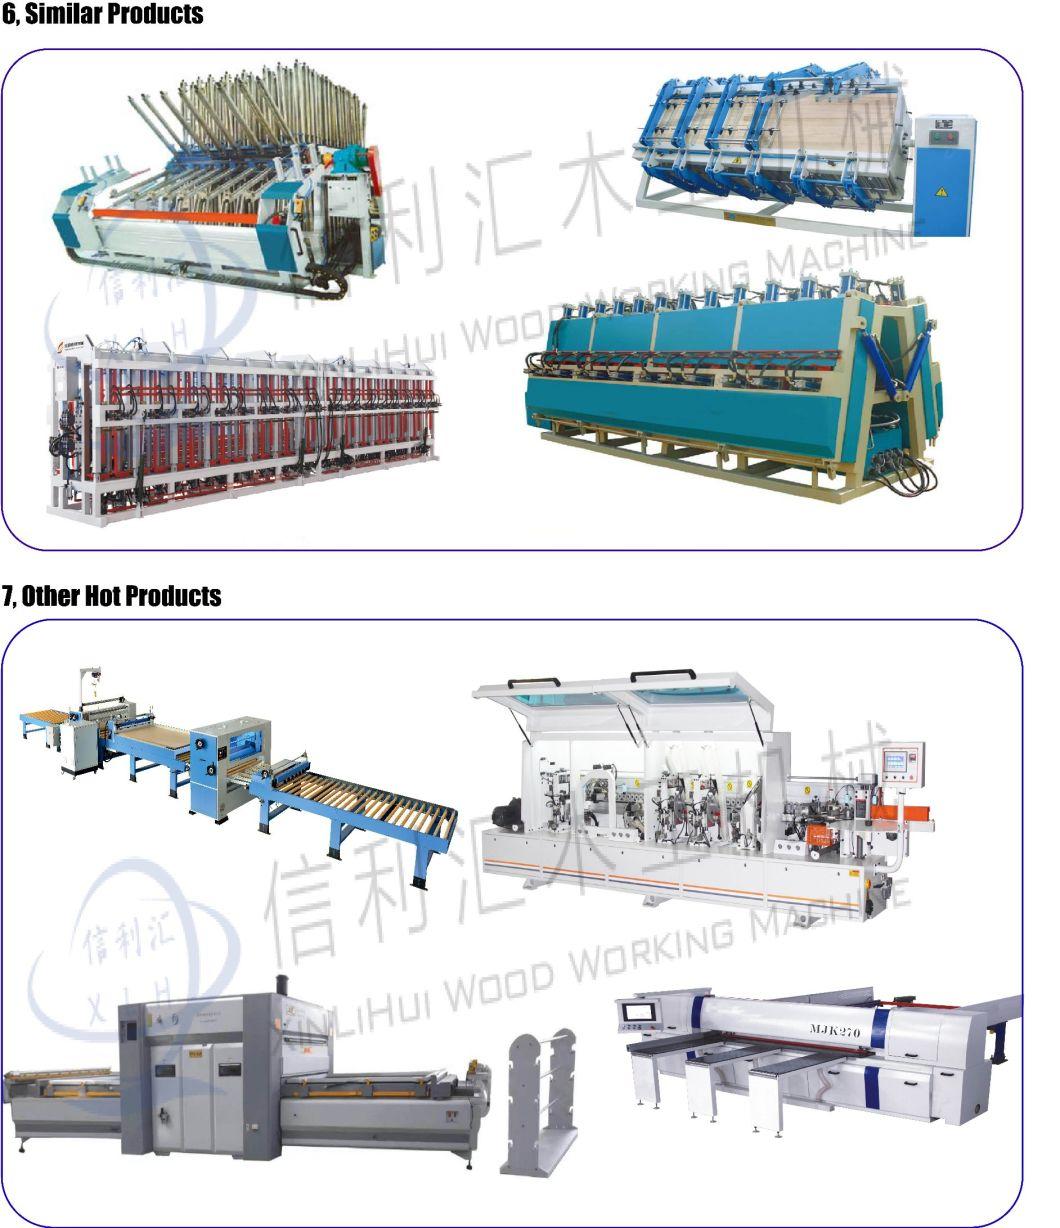 Hot Selling Cheap Price Two-Side Hydraulic Composer Oil Pressure Clamp Machine/ Woodworking Vertical Timber Press Machine Factory Supply